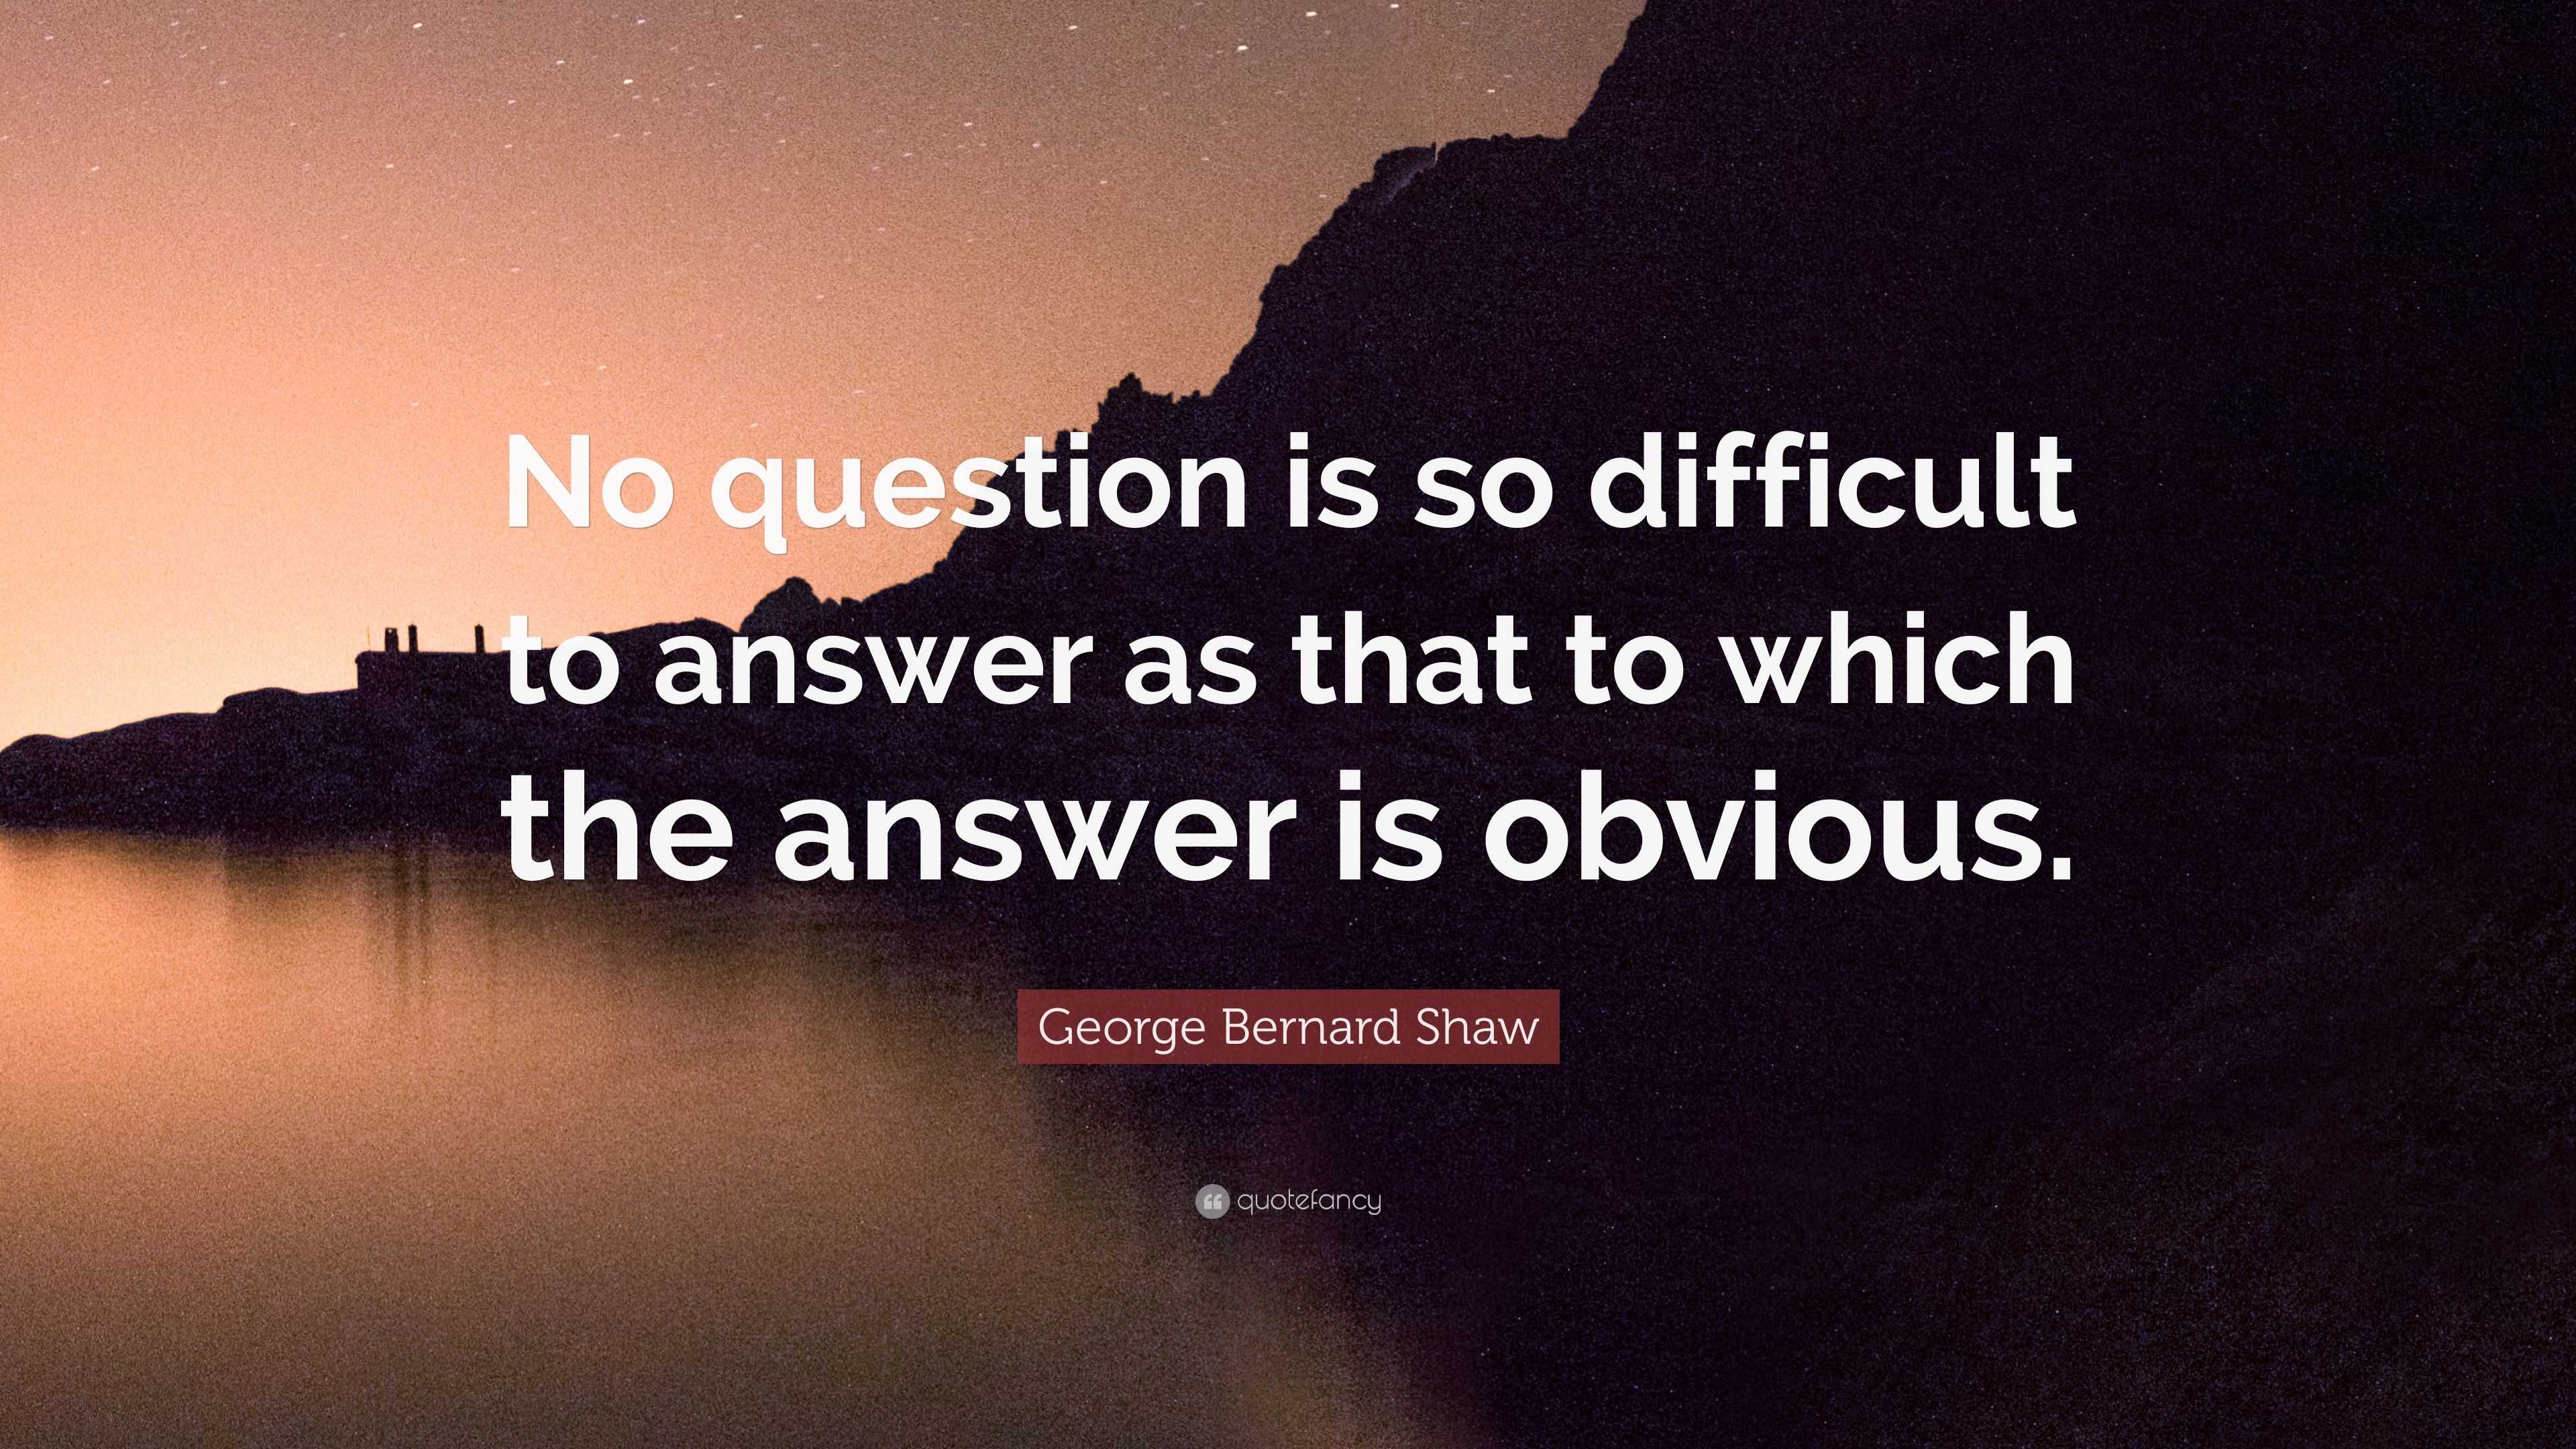 George Bernard Shaw Quote: “No question is so difficult to answer